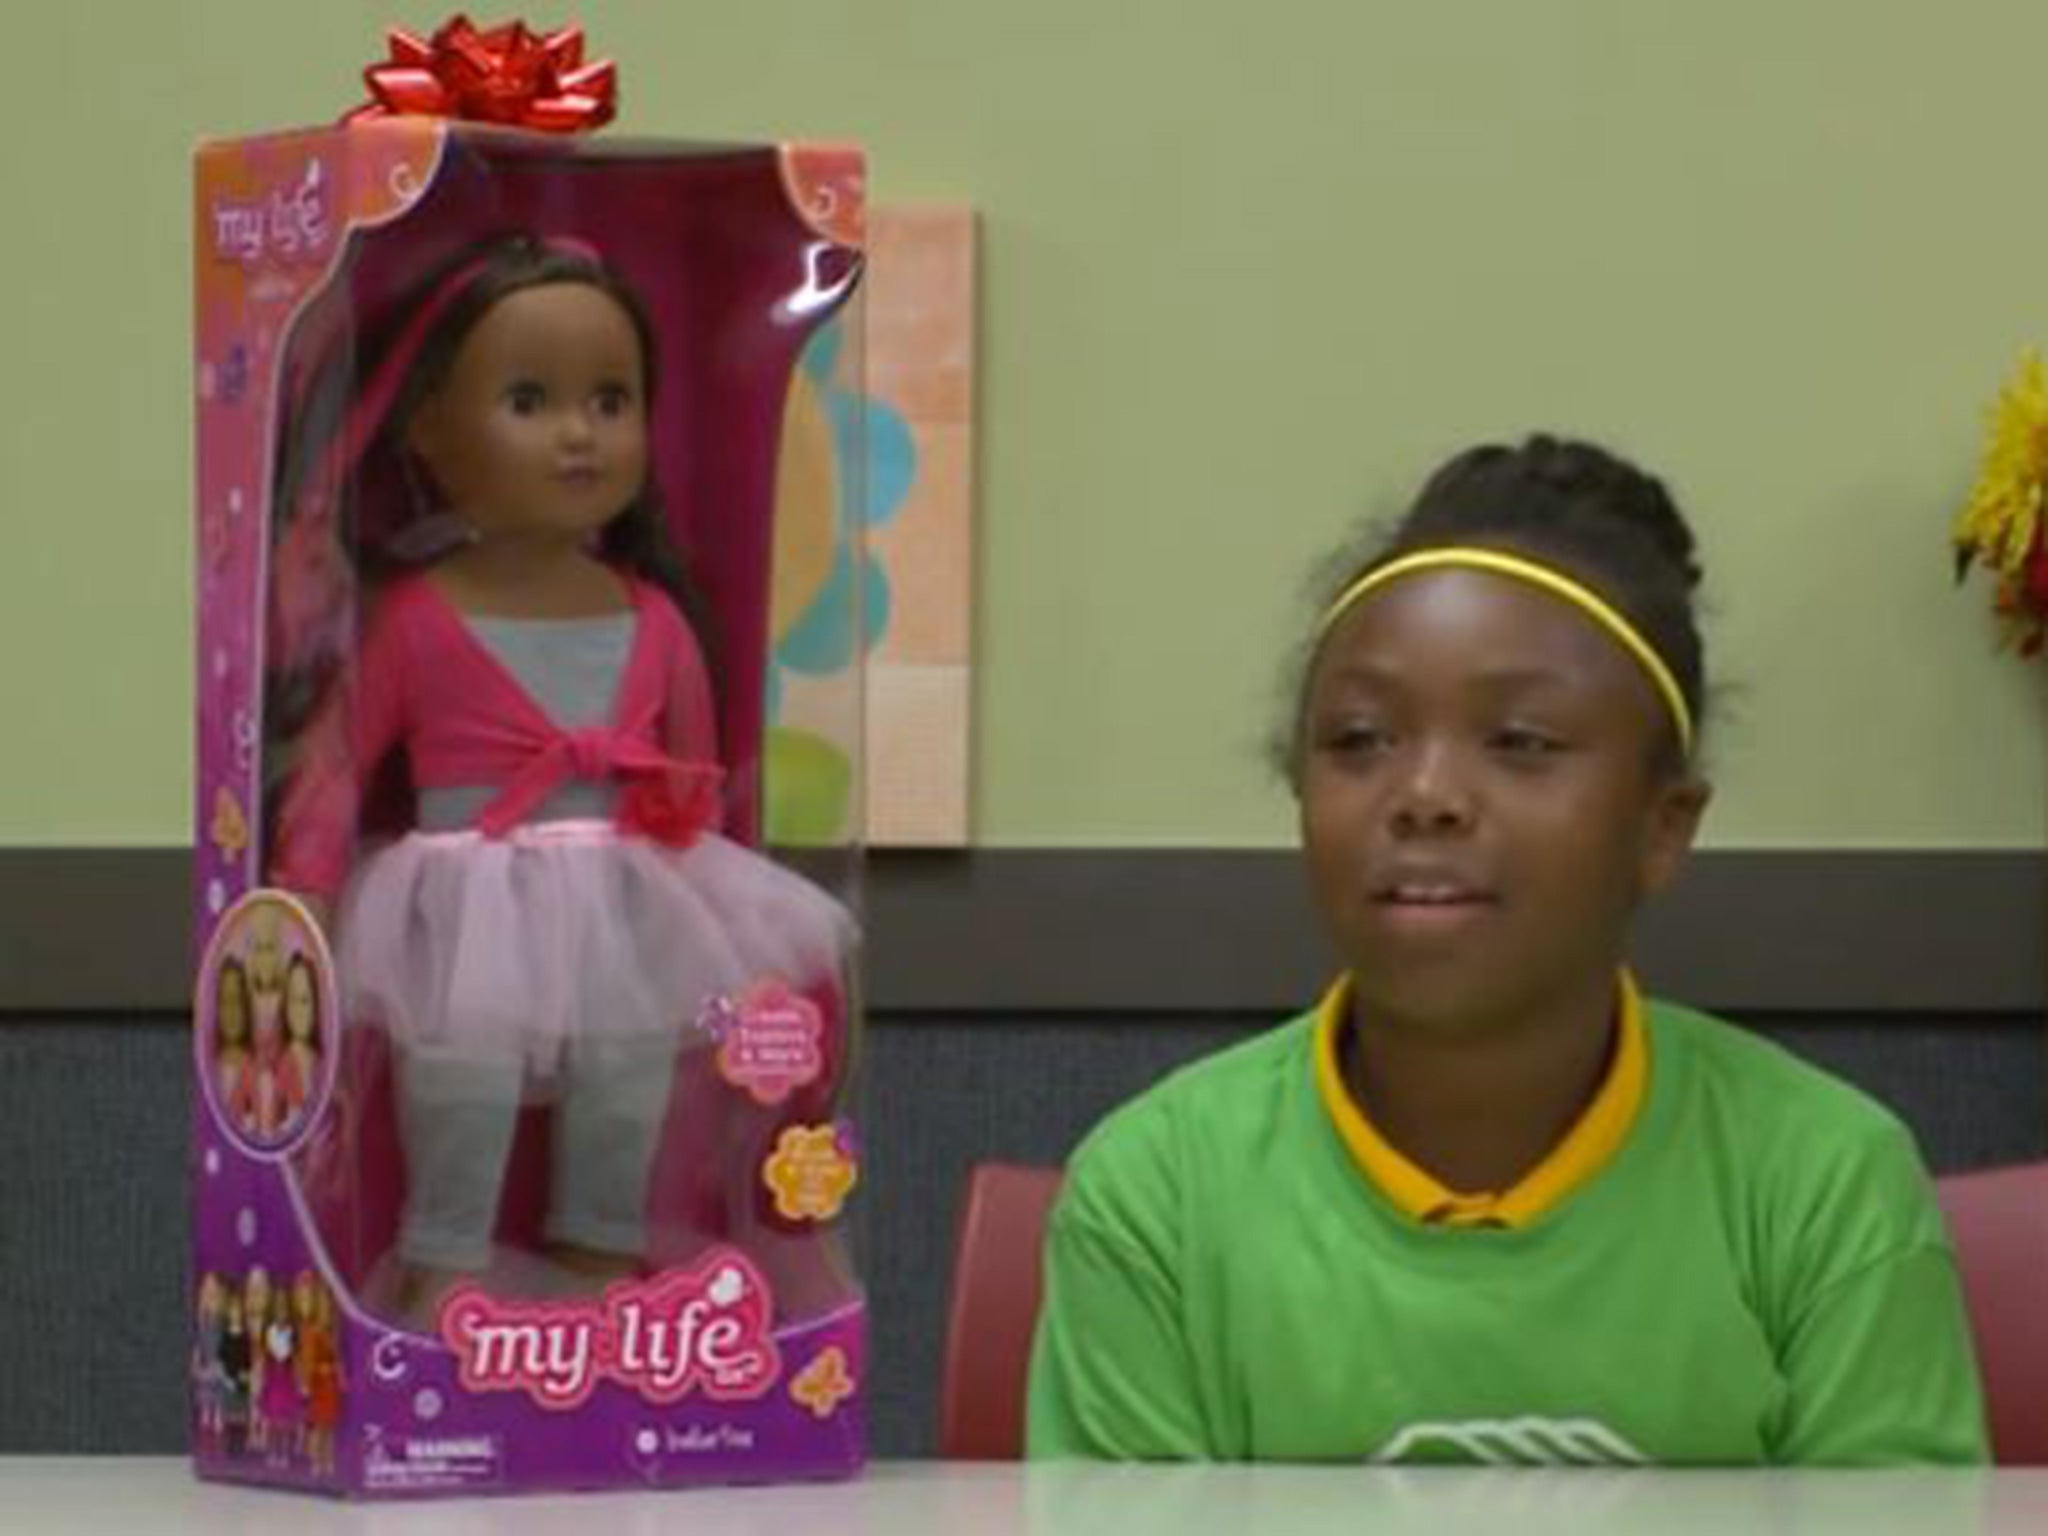 The children's wishes for themselves ranged from a computer, to an Xbox 360, to a Barbie house